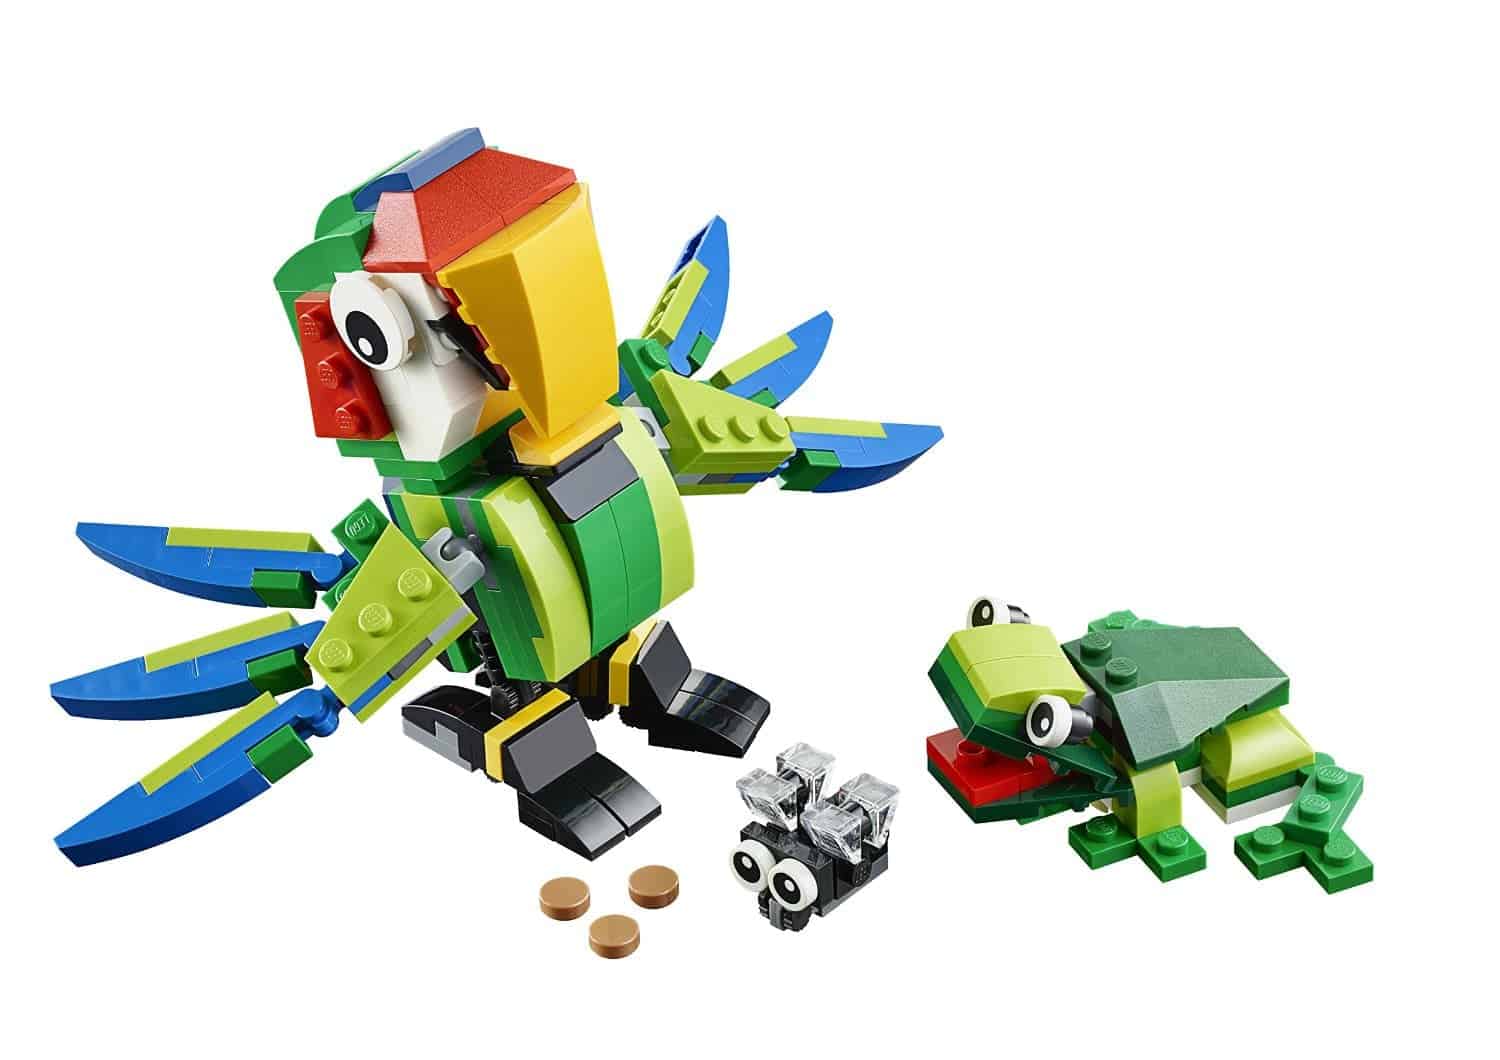 Lego Gift Ideas by Age - Toddler to Twelve Years: Rainforest Animals | www.thepinningmama.com